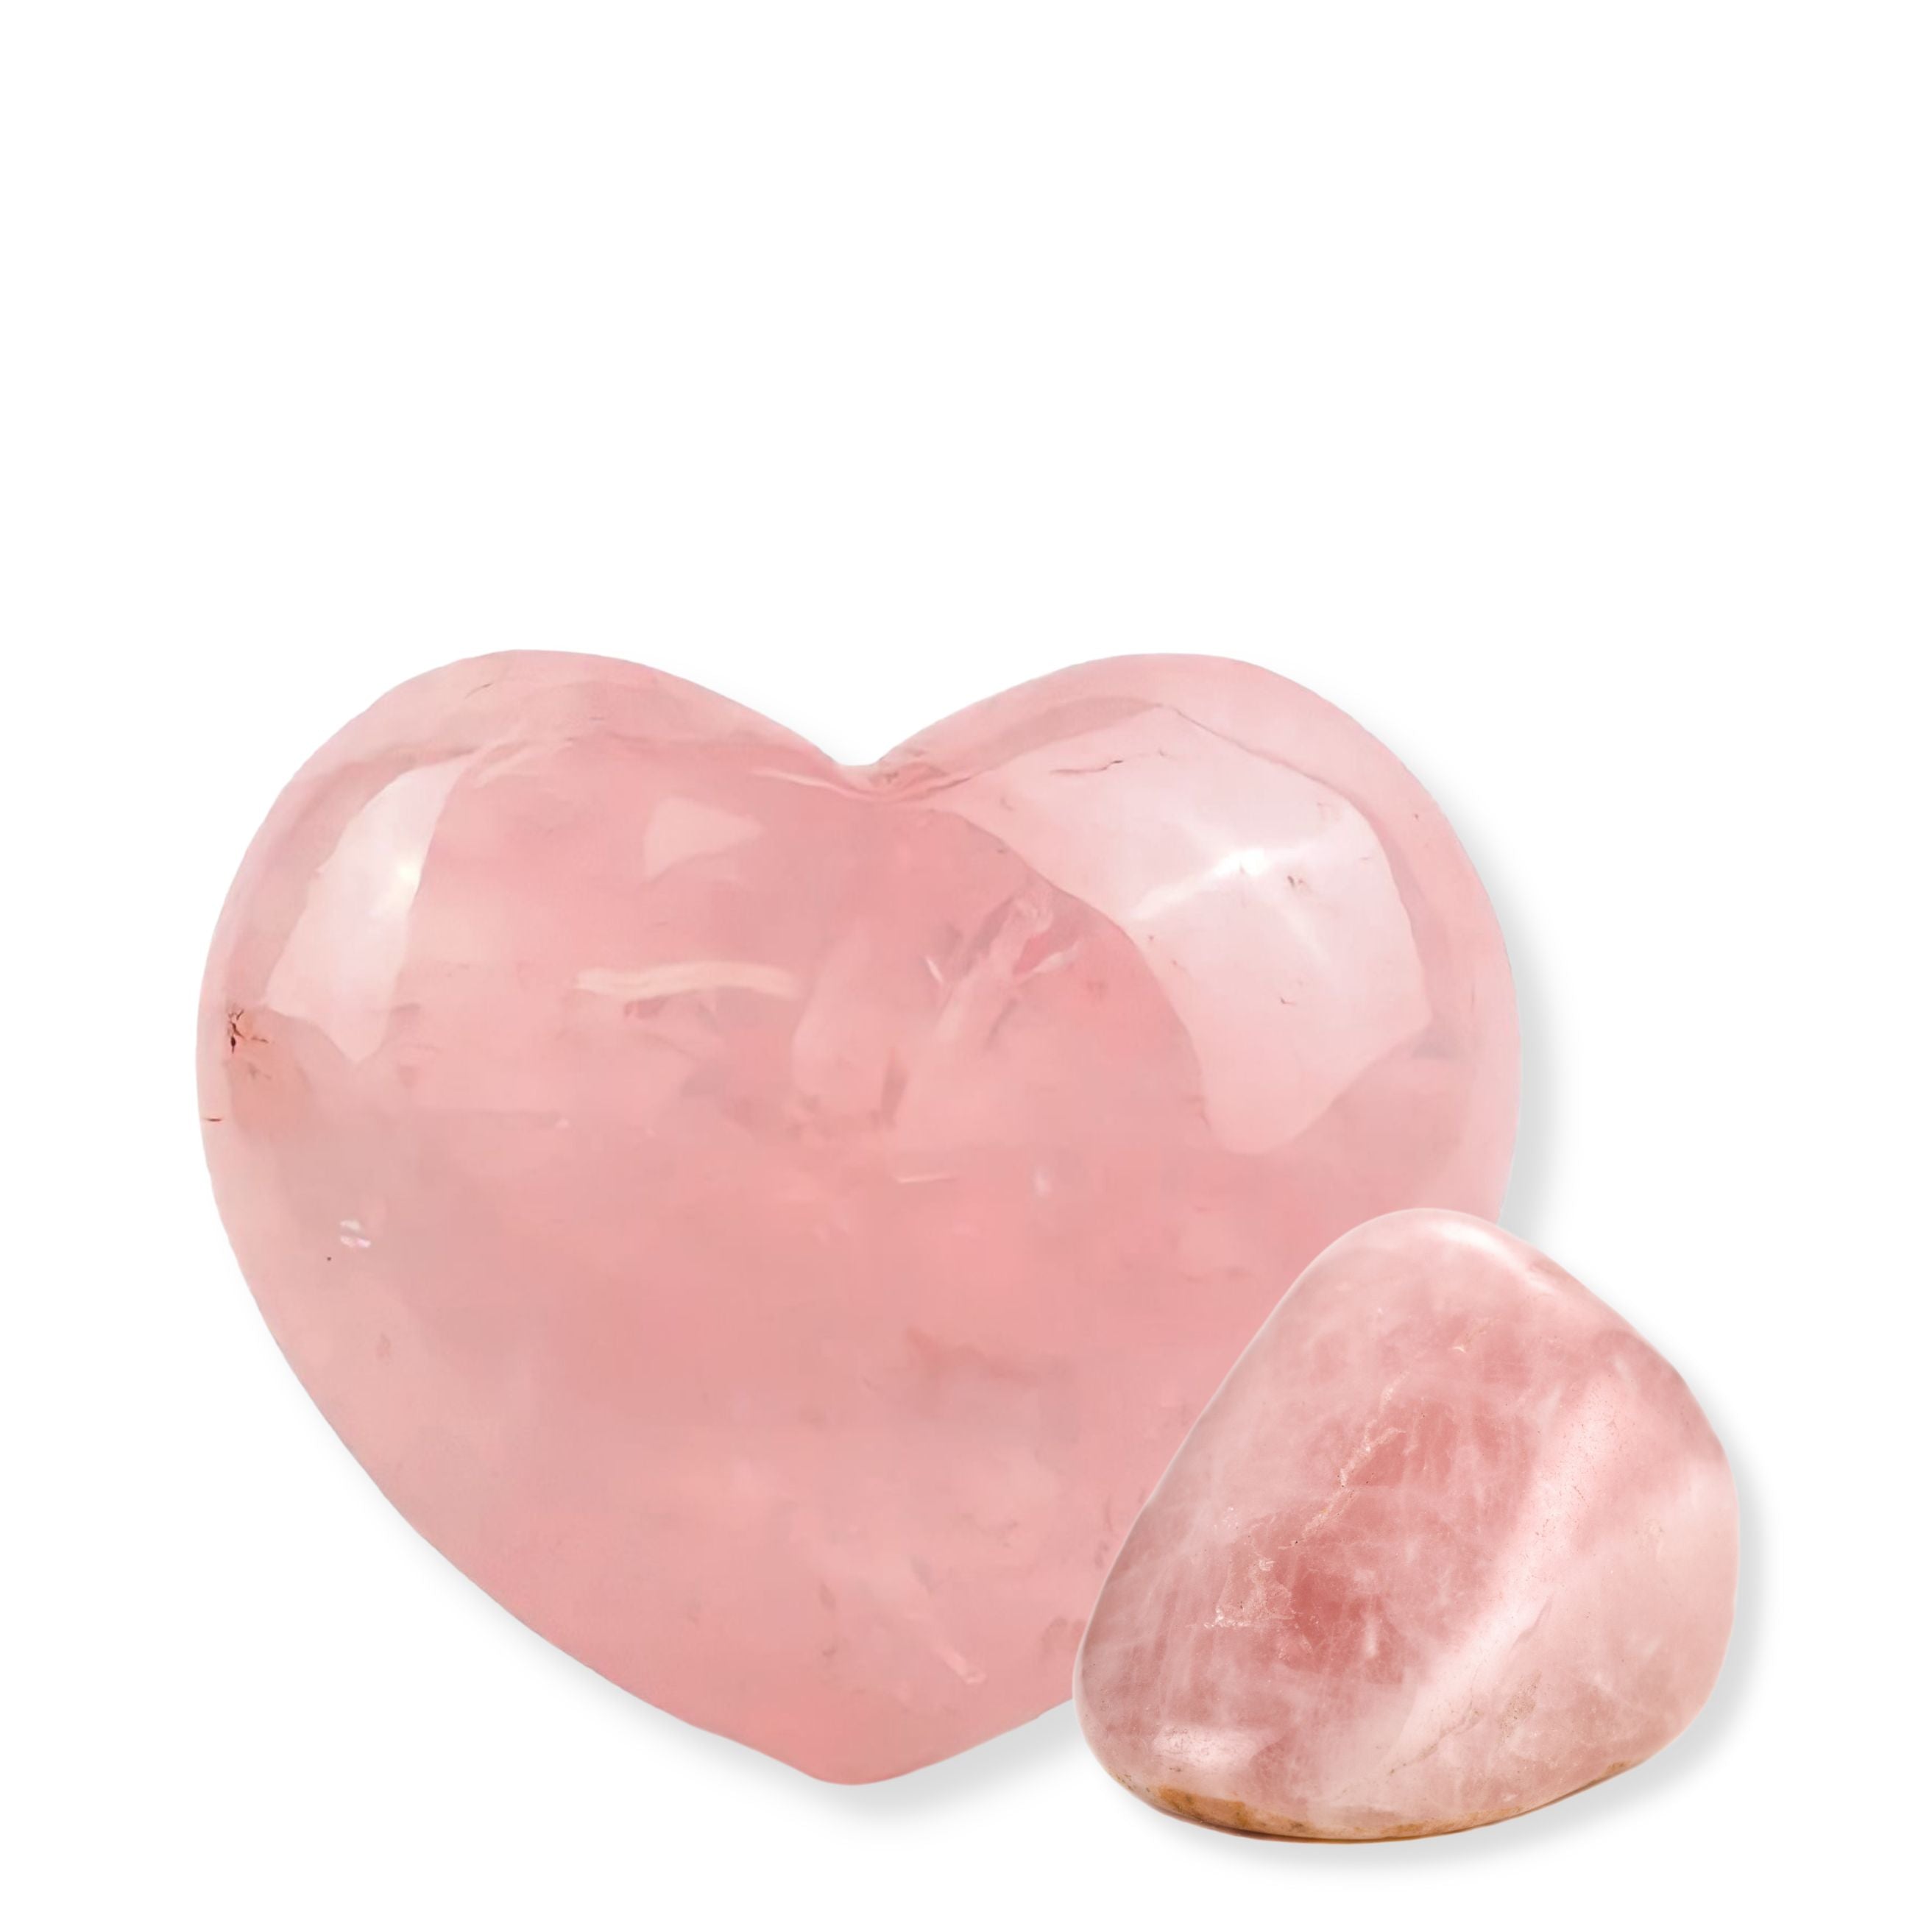 Hi Barbie! 5 Pink Crystals that Promote Positivity and Love